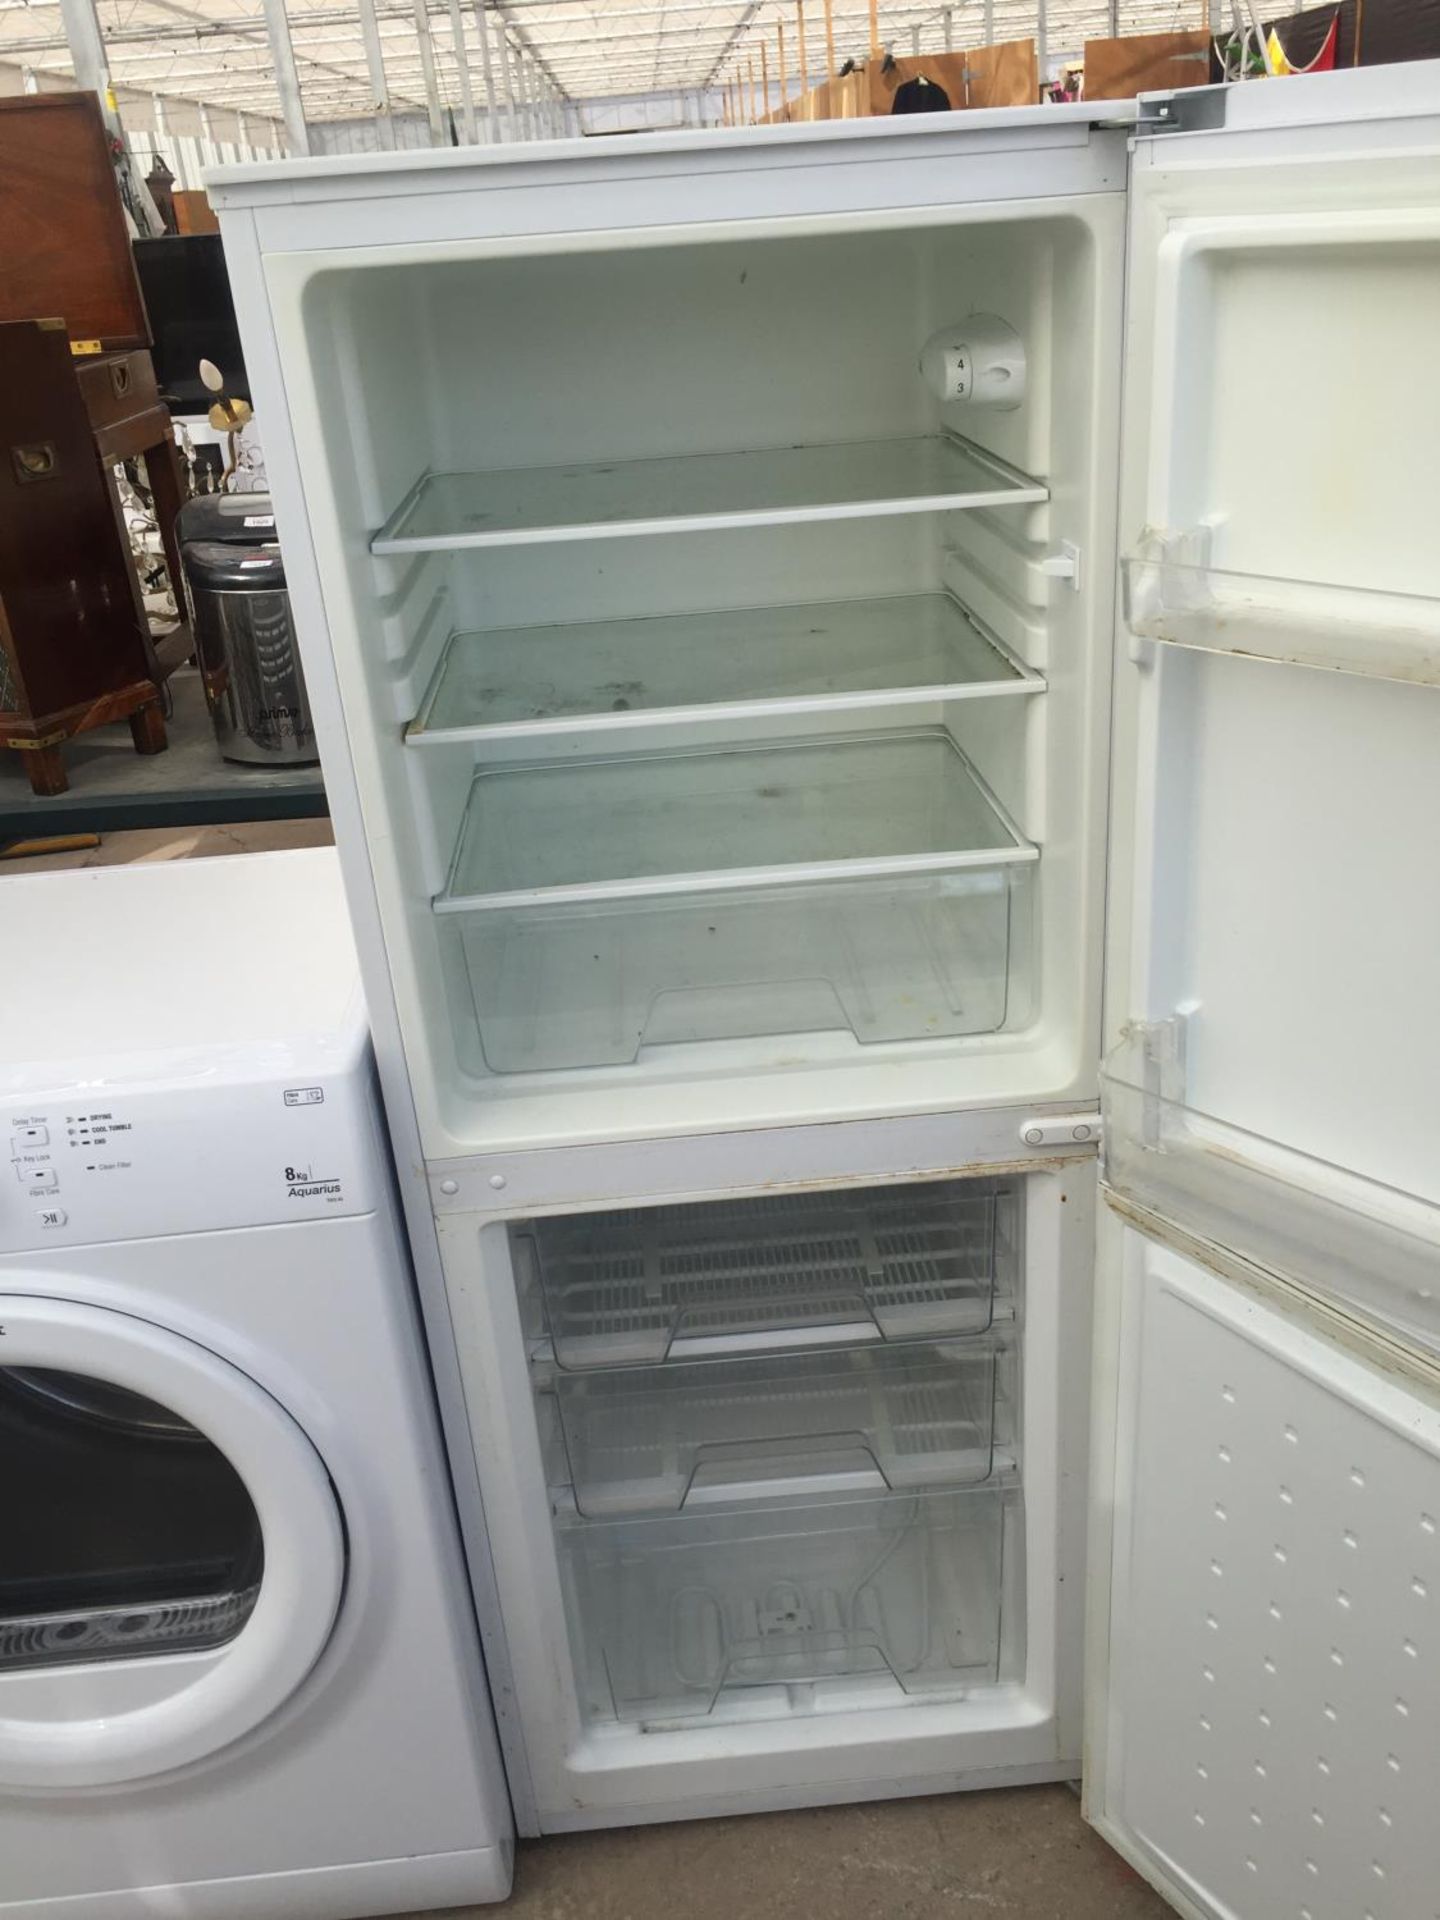 A WHITE CURRYS ESSENTIAL UPRIGHT FRIDGE FREEZER BELIEVED IN WORKING ORDER BUT NO WARRANTY - Image 2 of 2